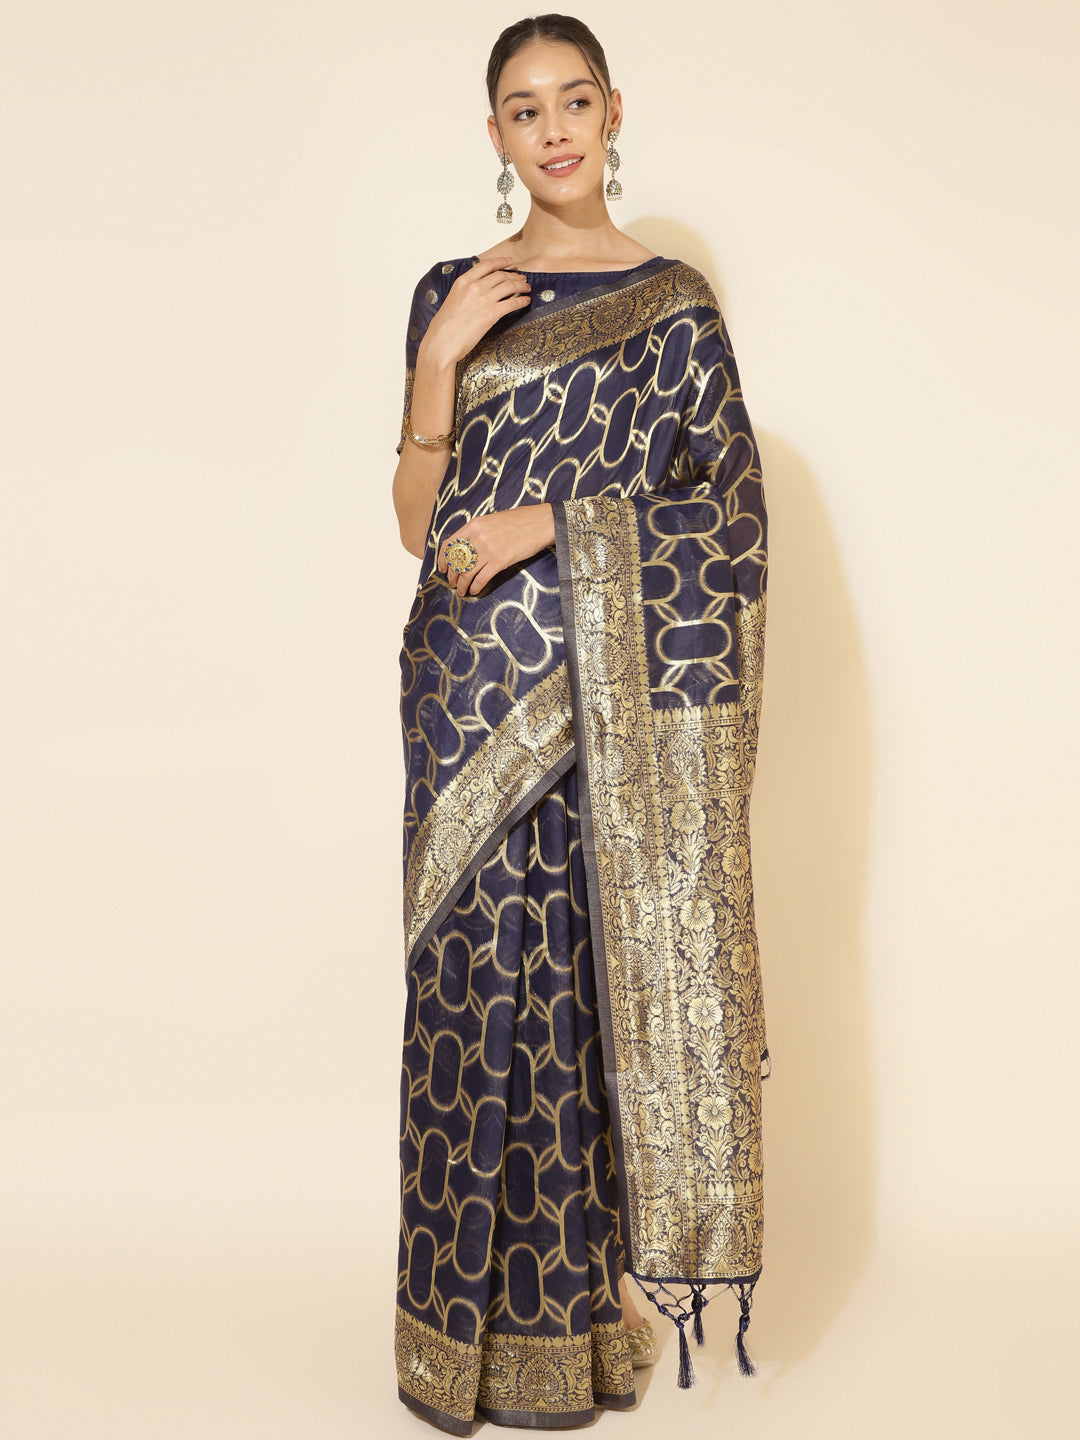 How To Style A Saree In 5 Different Ways? – ZERESOUQ